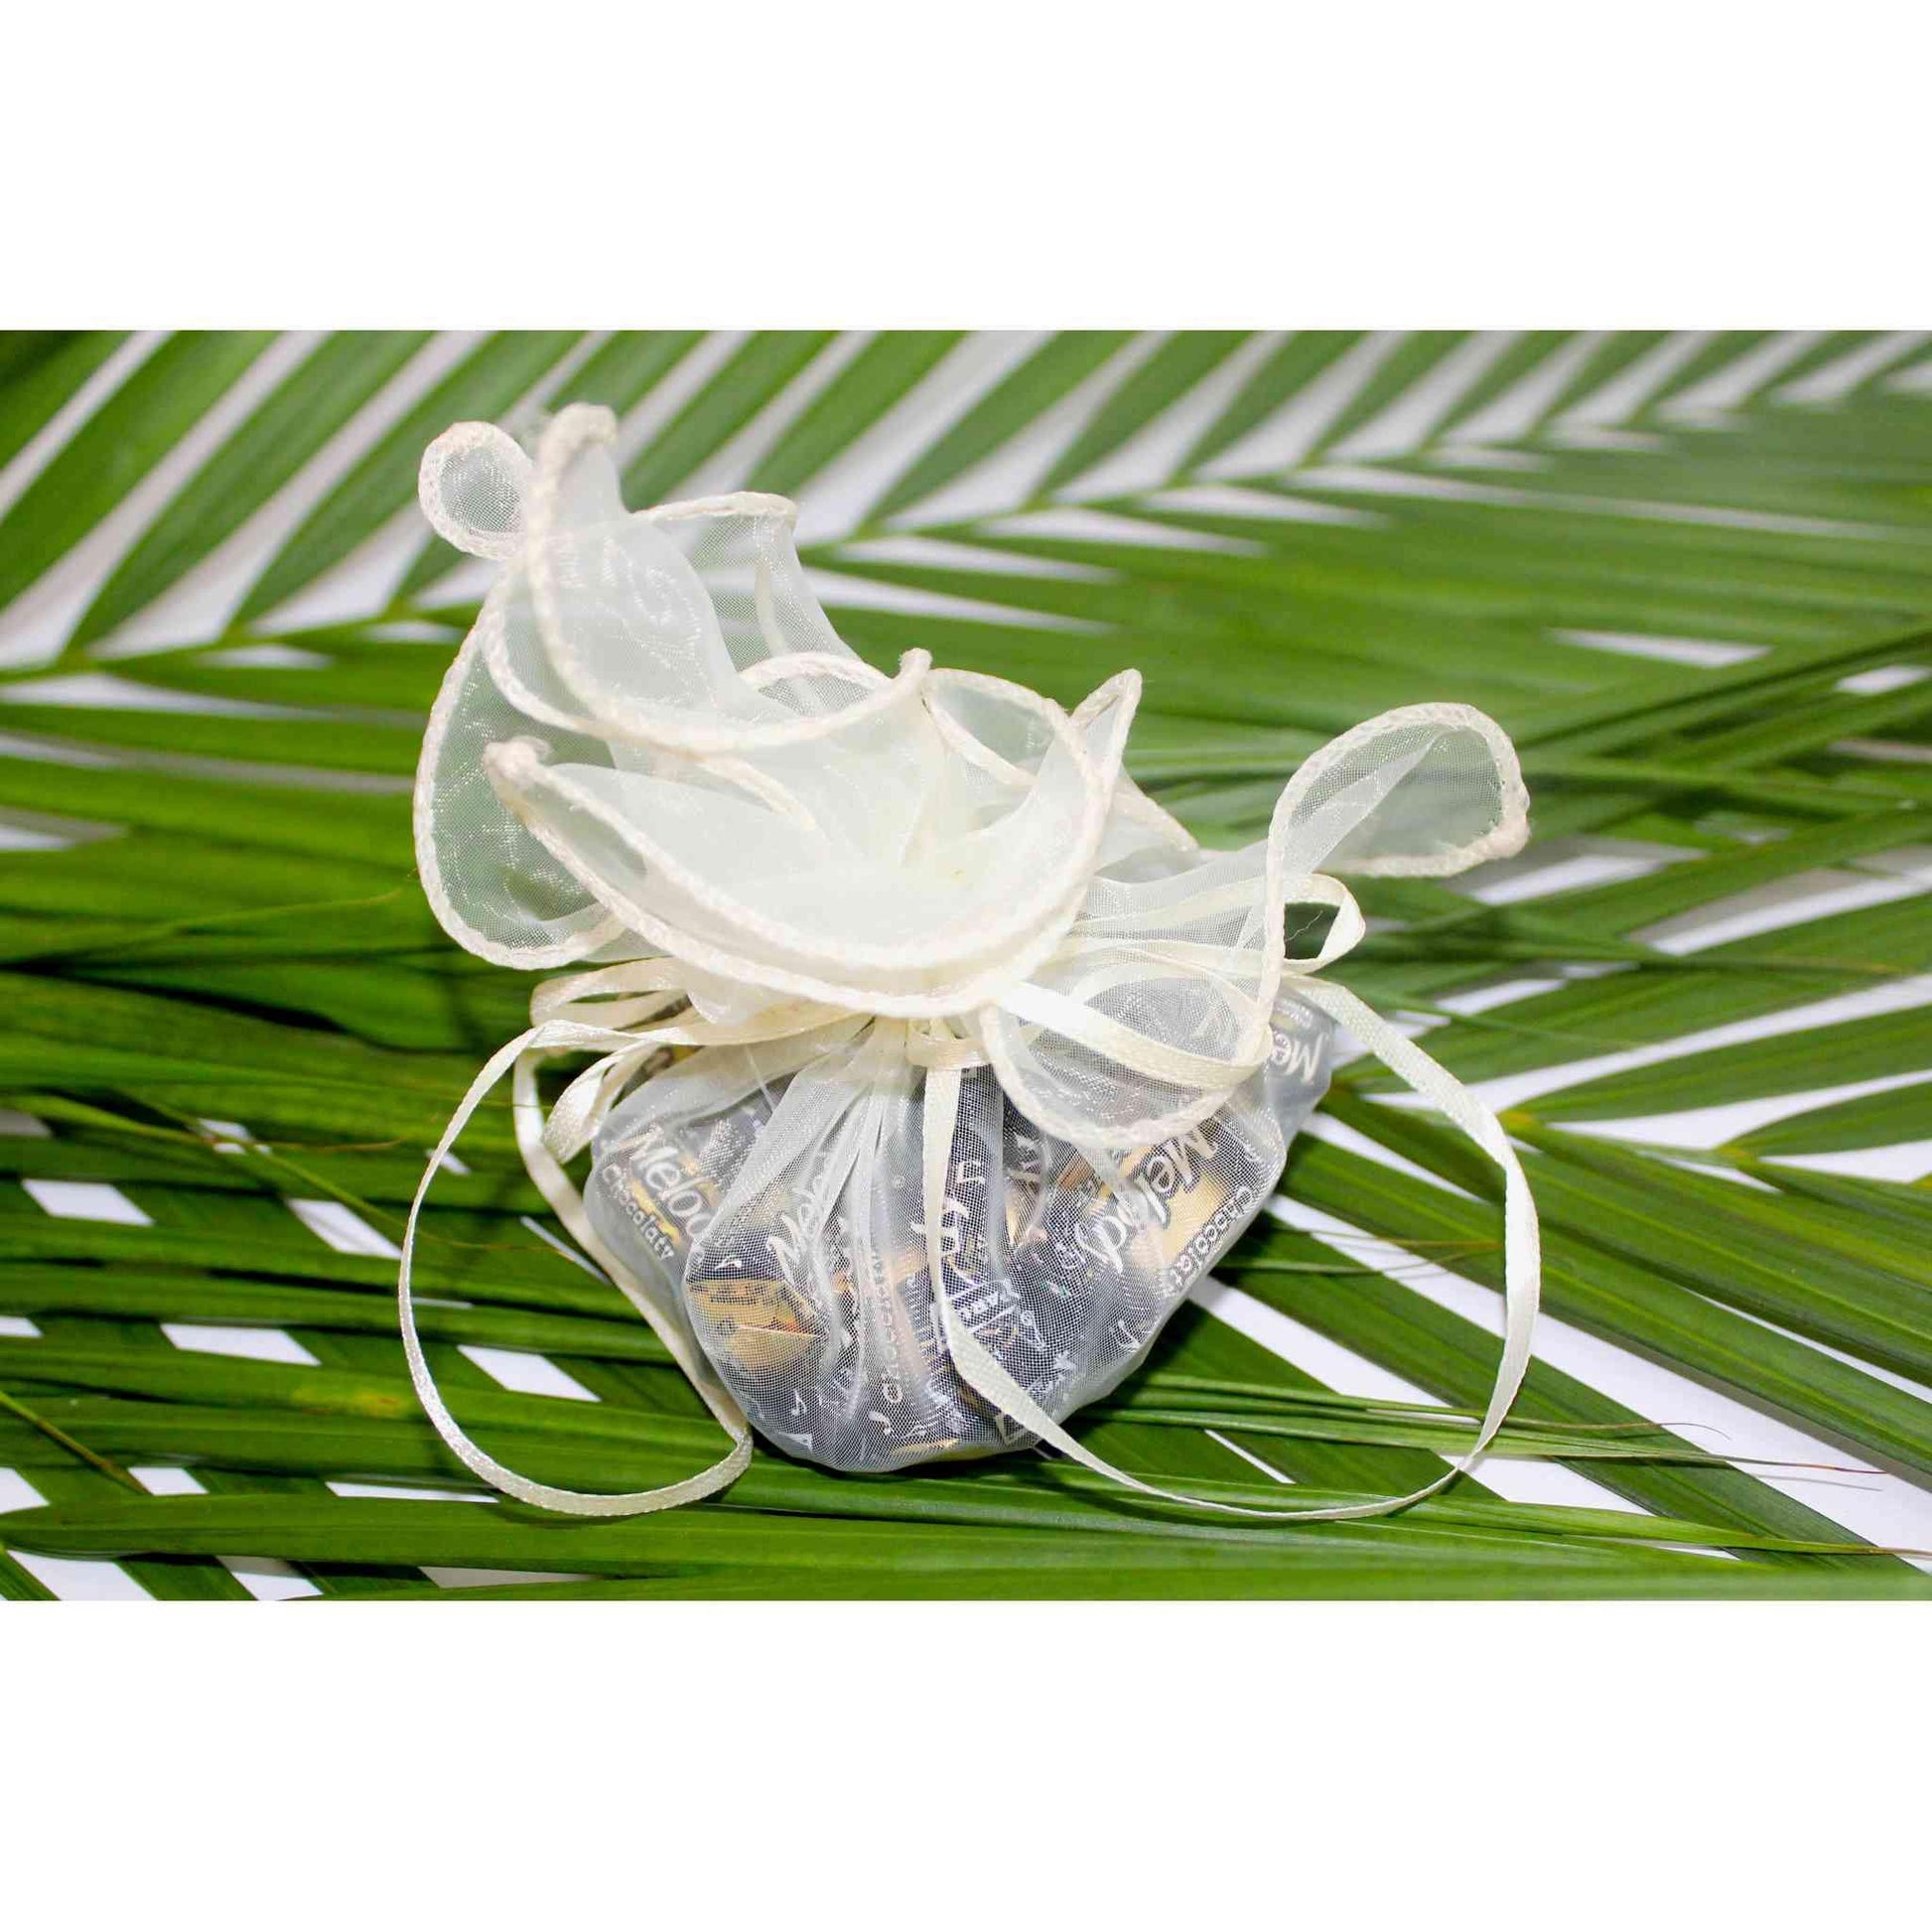 Indian Petals Durable Reusable multi-purpose Translucent Net with pull Strings Gift Bag Potli (Pack of 10) Holds Up to 2Kg, Ivory - Indian Petals